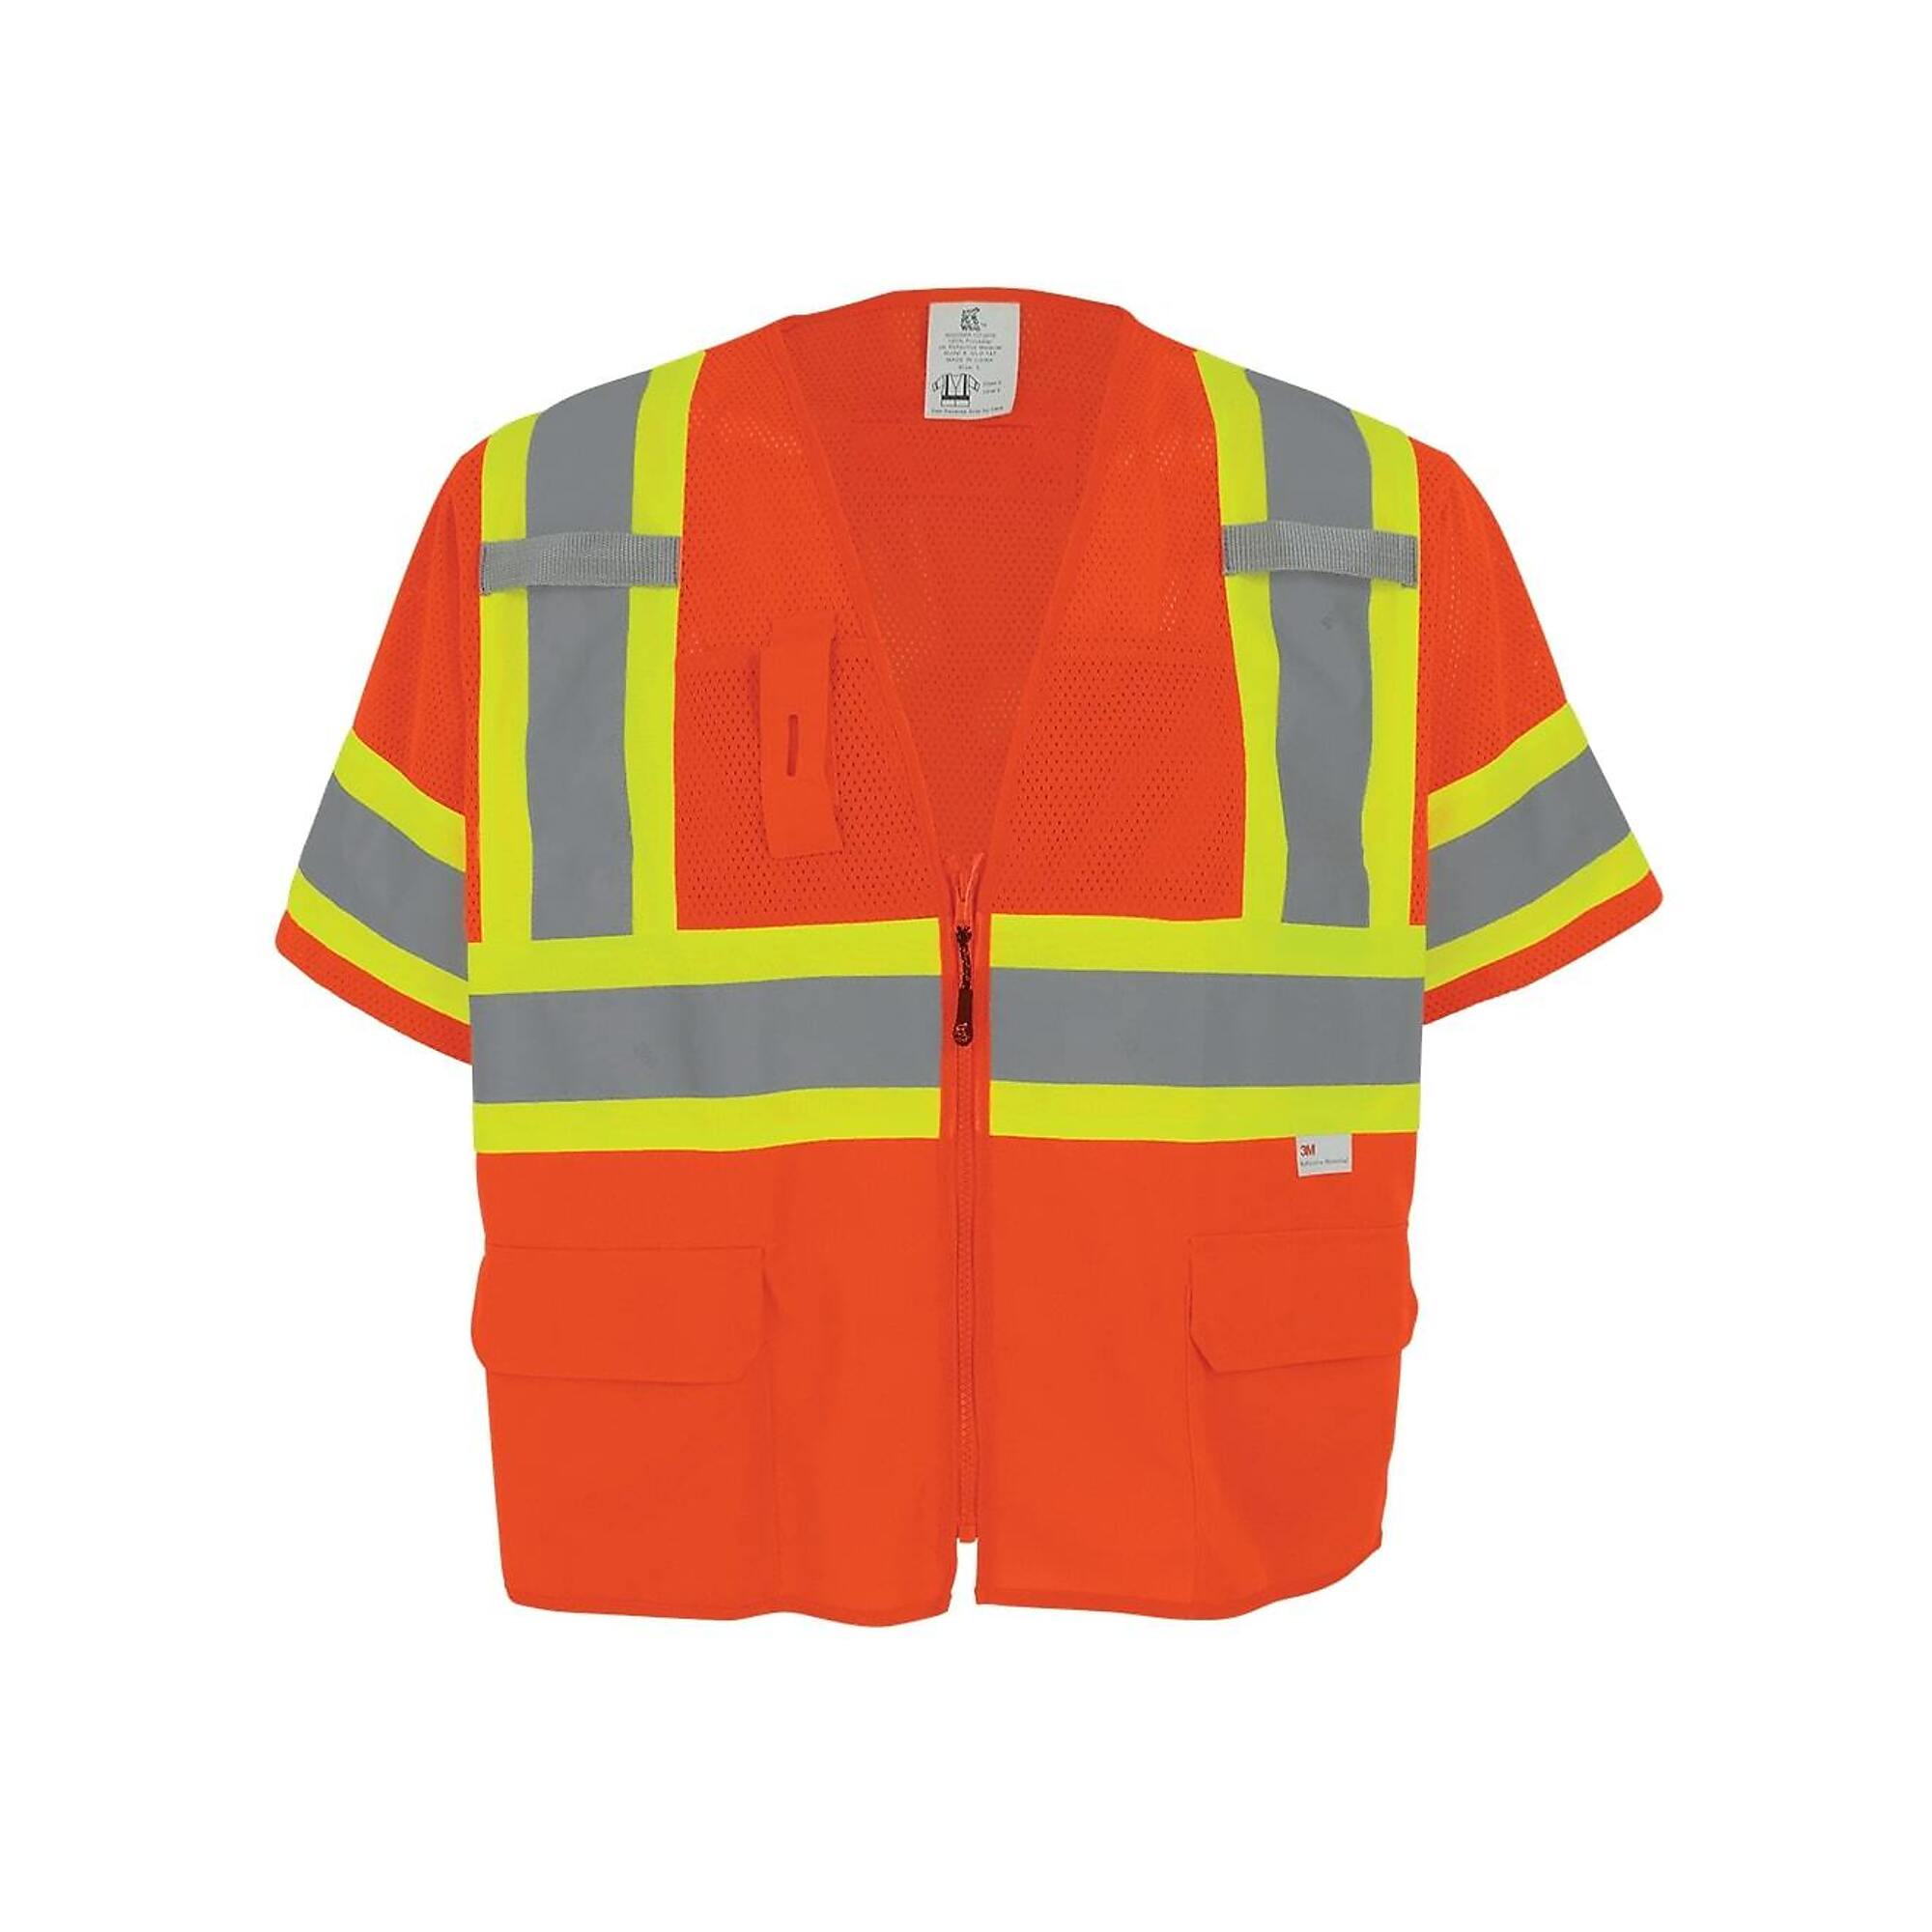 FrogWear, HV Orange, Class 3 6 Pockets, With Sleeves Solid/Mesh Vest, Size XL, Color High-Visibility Orange, Model GLO-147-XL